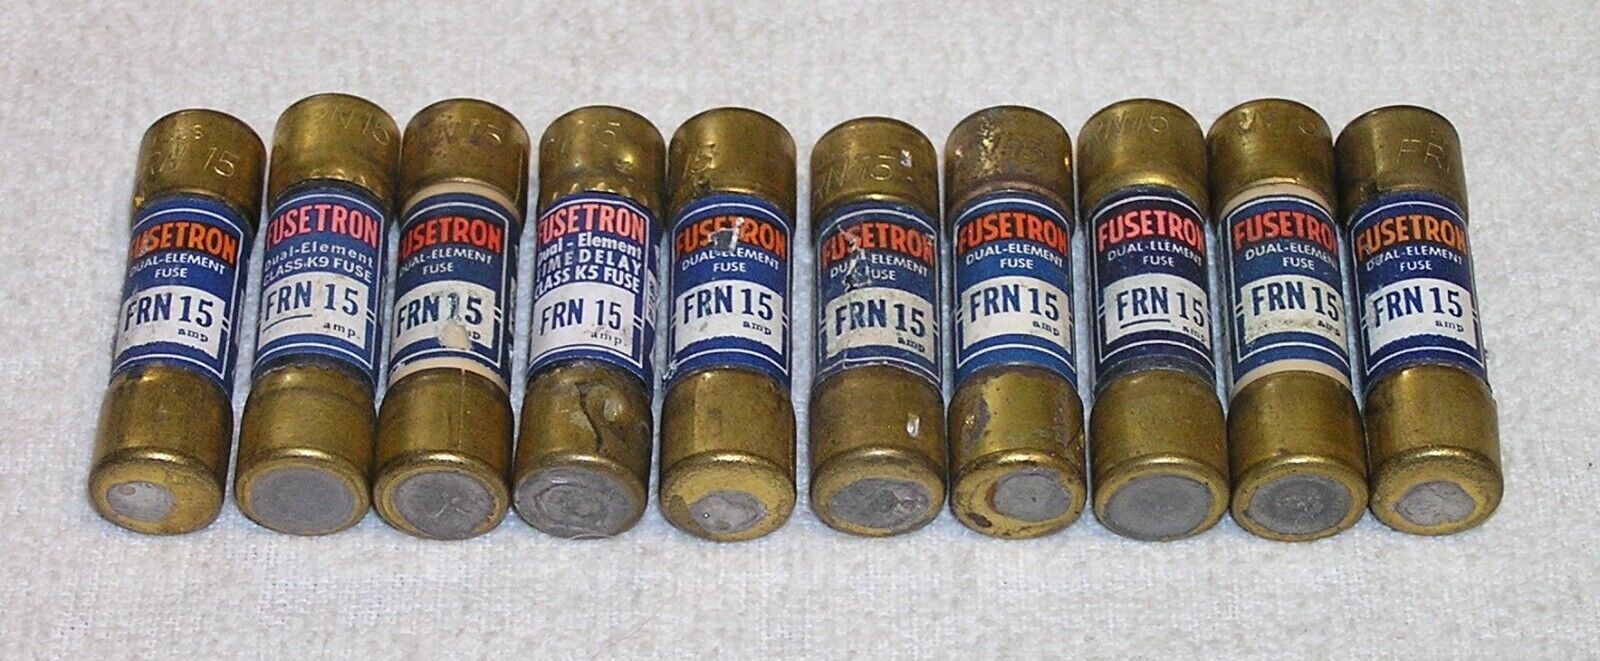 Primary image for Lot of 10 Buss Fusetron Type FRN 15 Amp Time Delay Cartridge Fuses